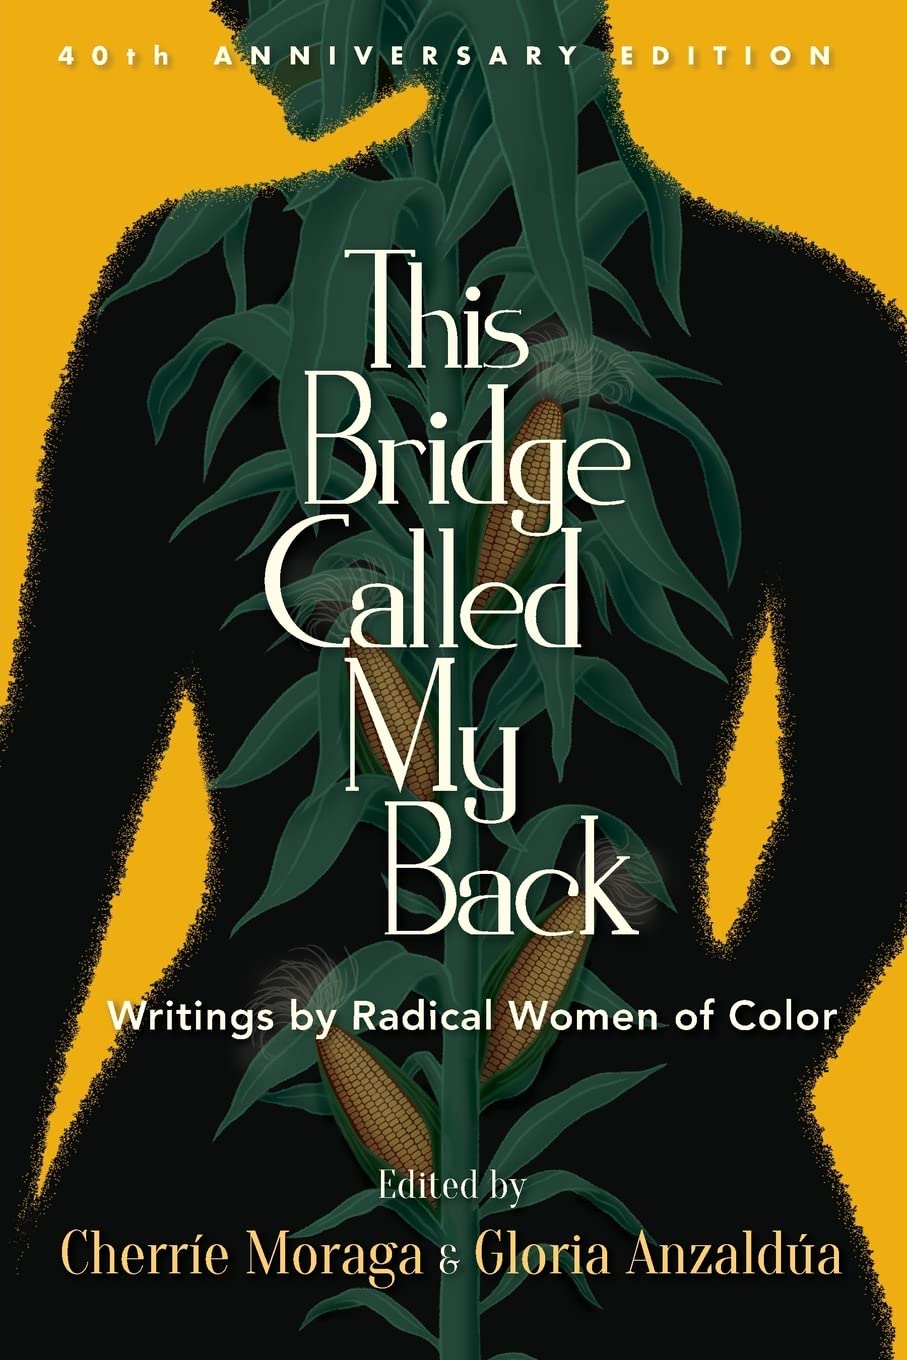 This Bridge Called My Back // Writings by Radical Women of Color (40th Anniversary Edition)